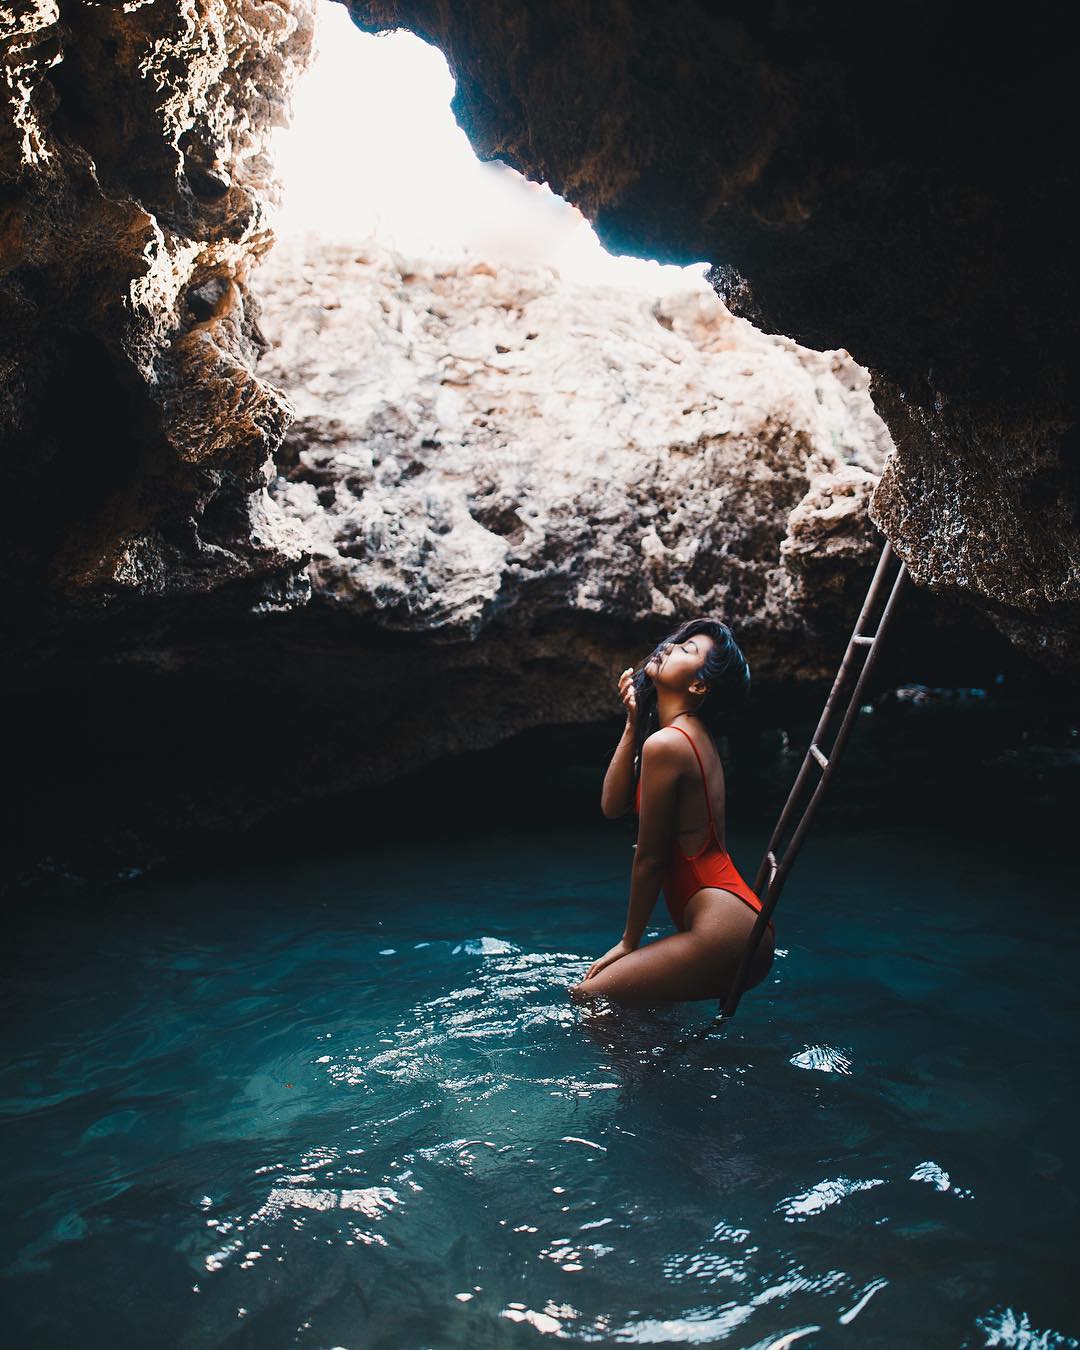 Explore mermaid cave (#7 on 26 best things to do on Oahu)